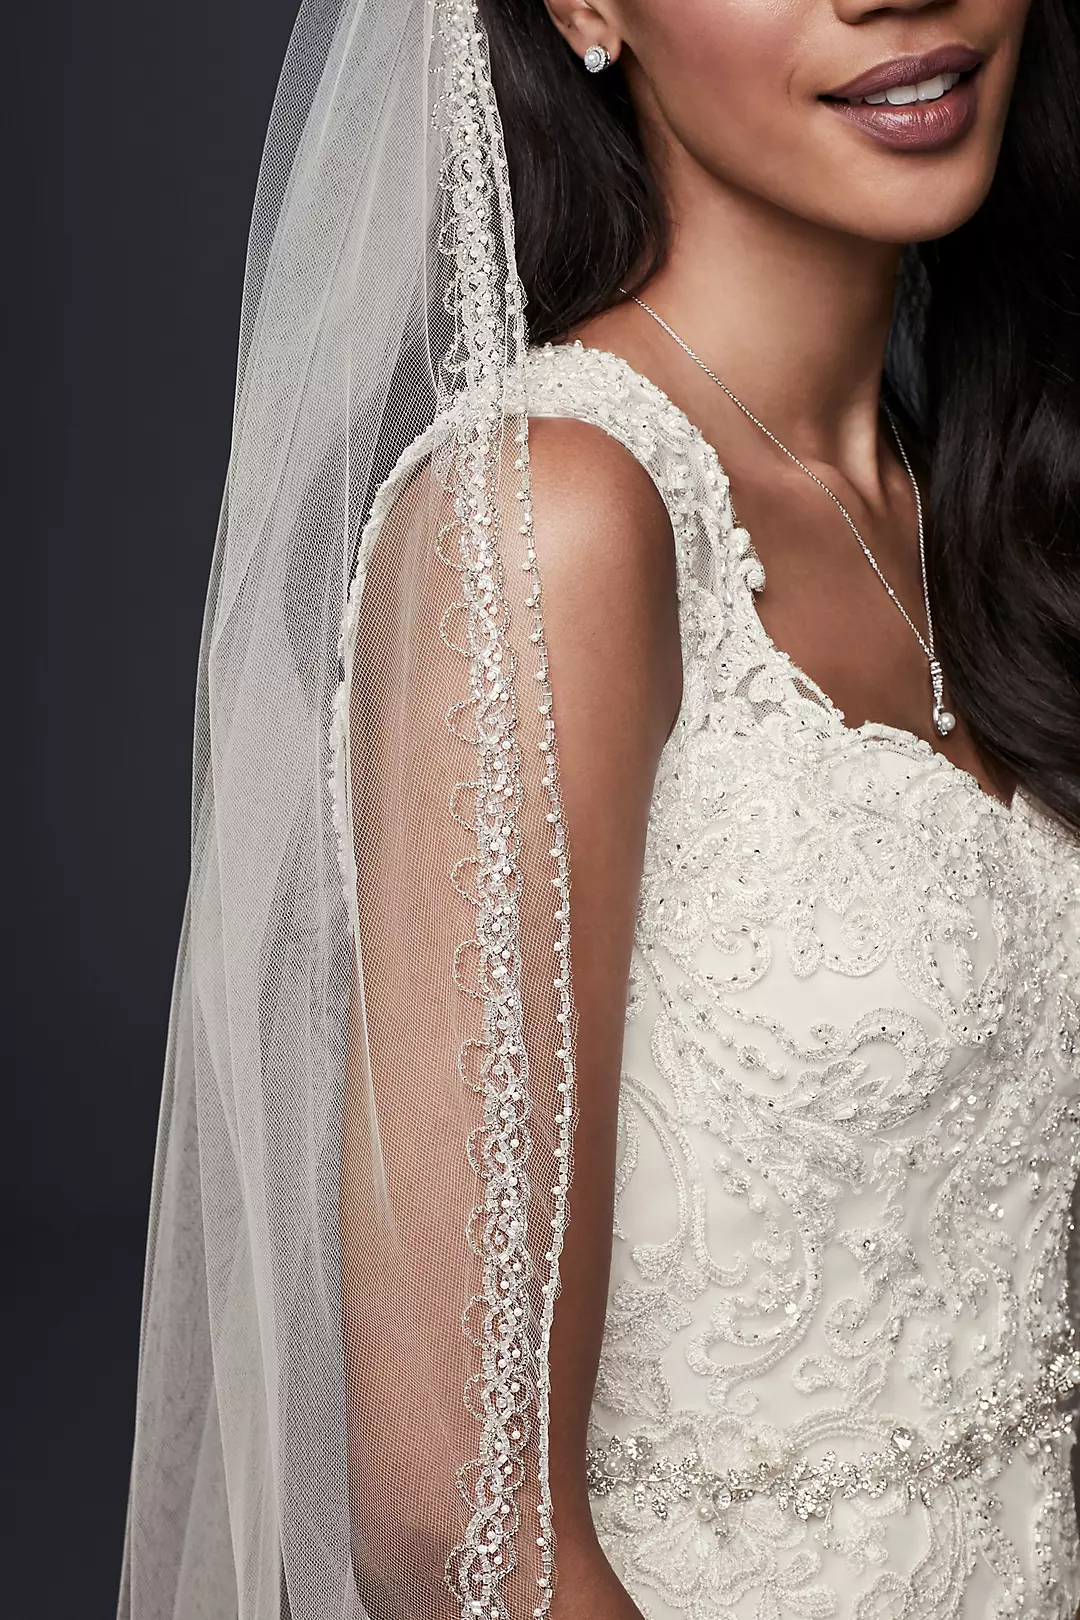 One Tier Mid Veil with Beaded Design Image 2